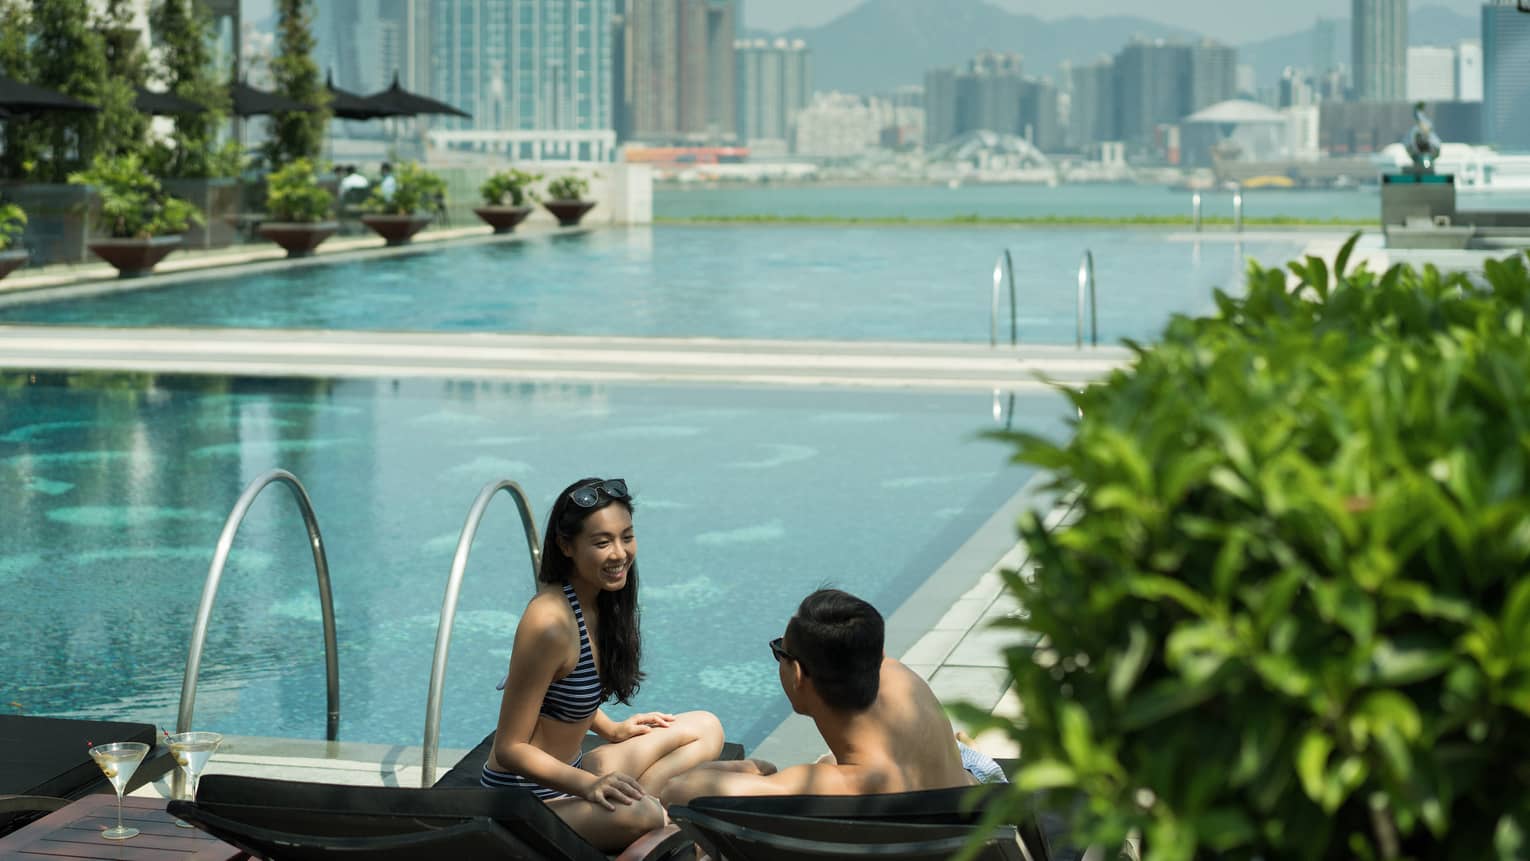 Couple wearing swimsuits on outdoor swimming pool deck, city skyline in background